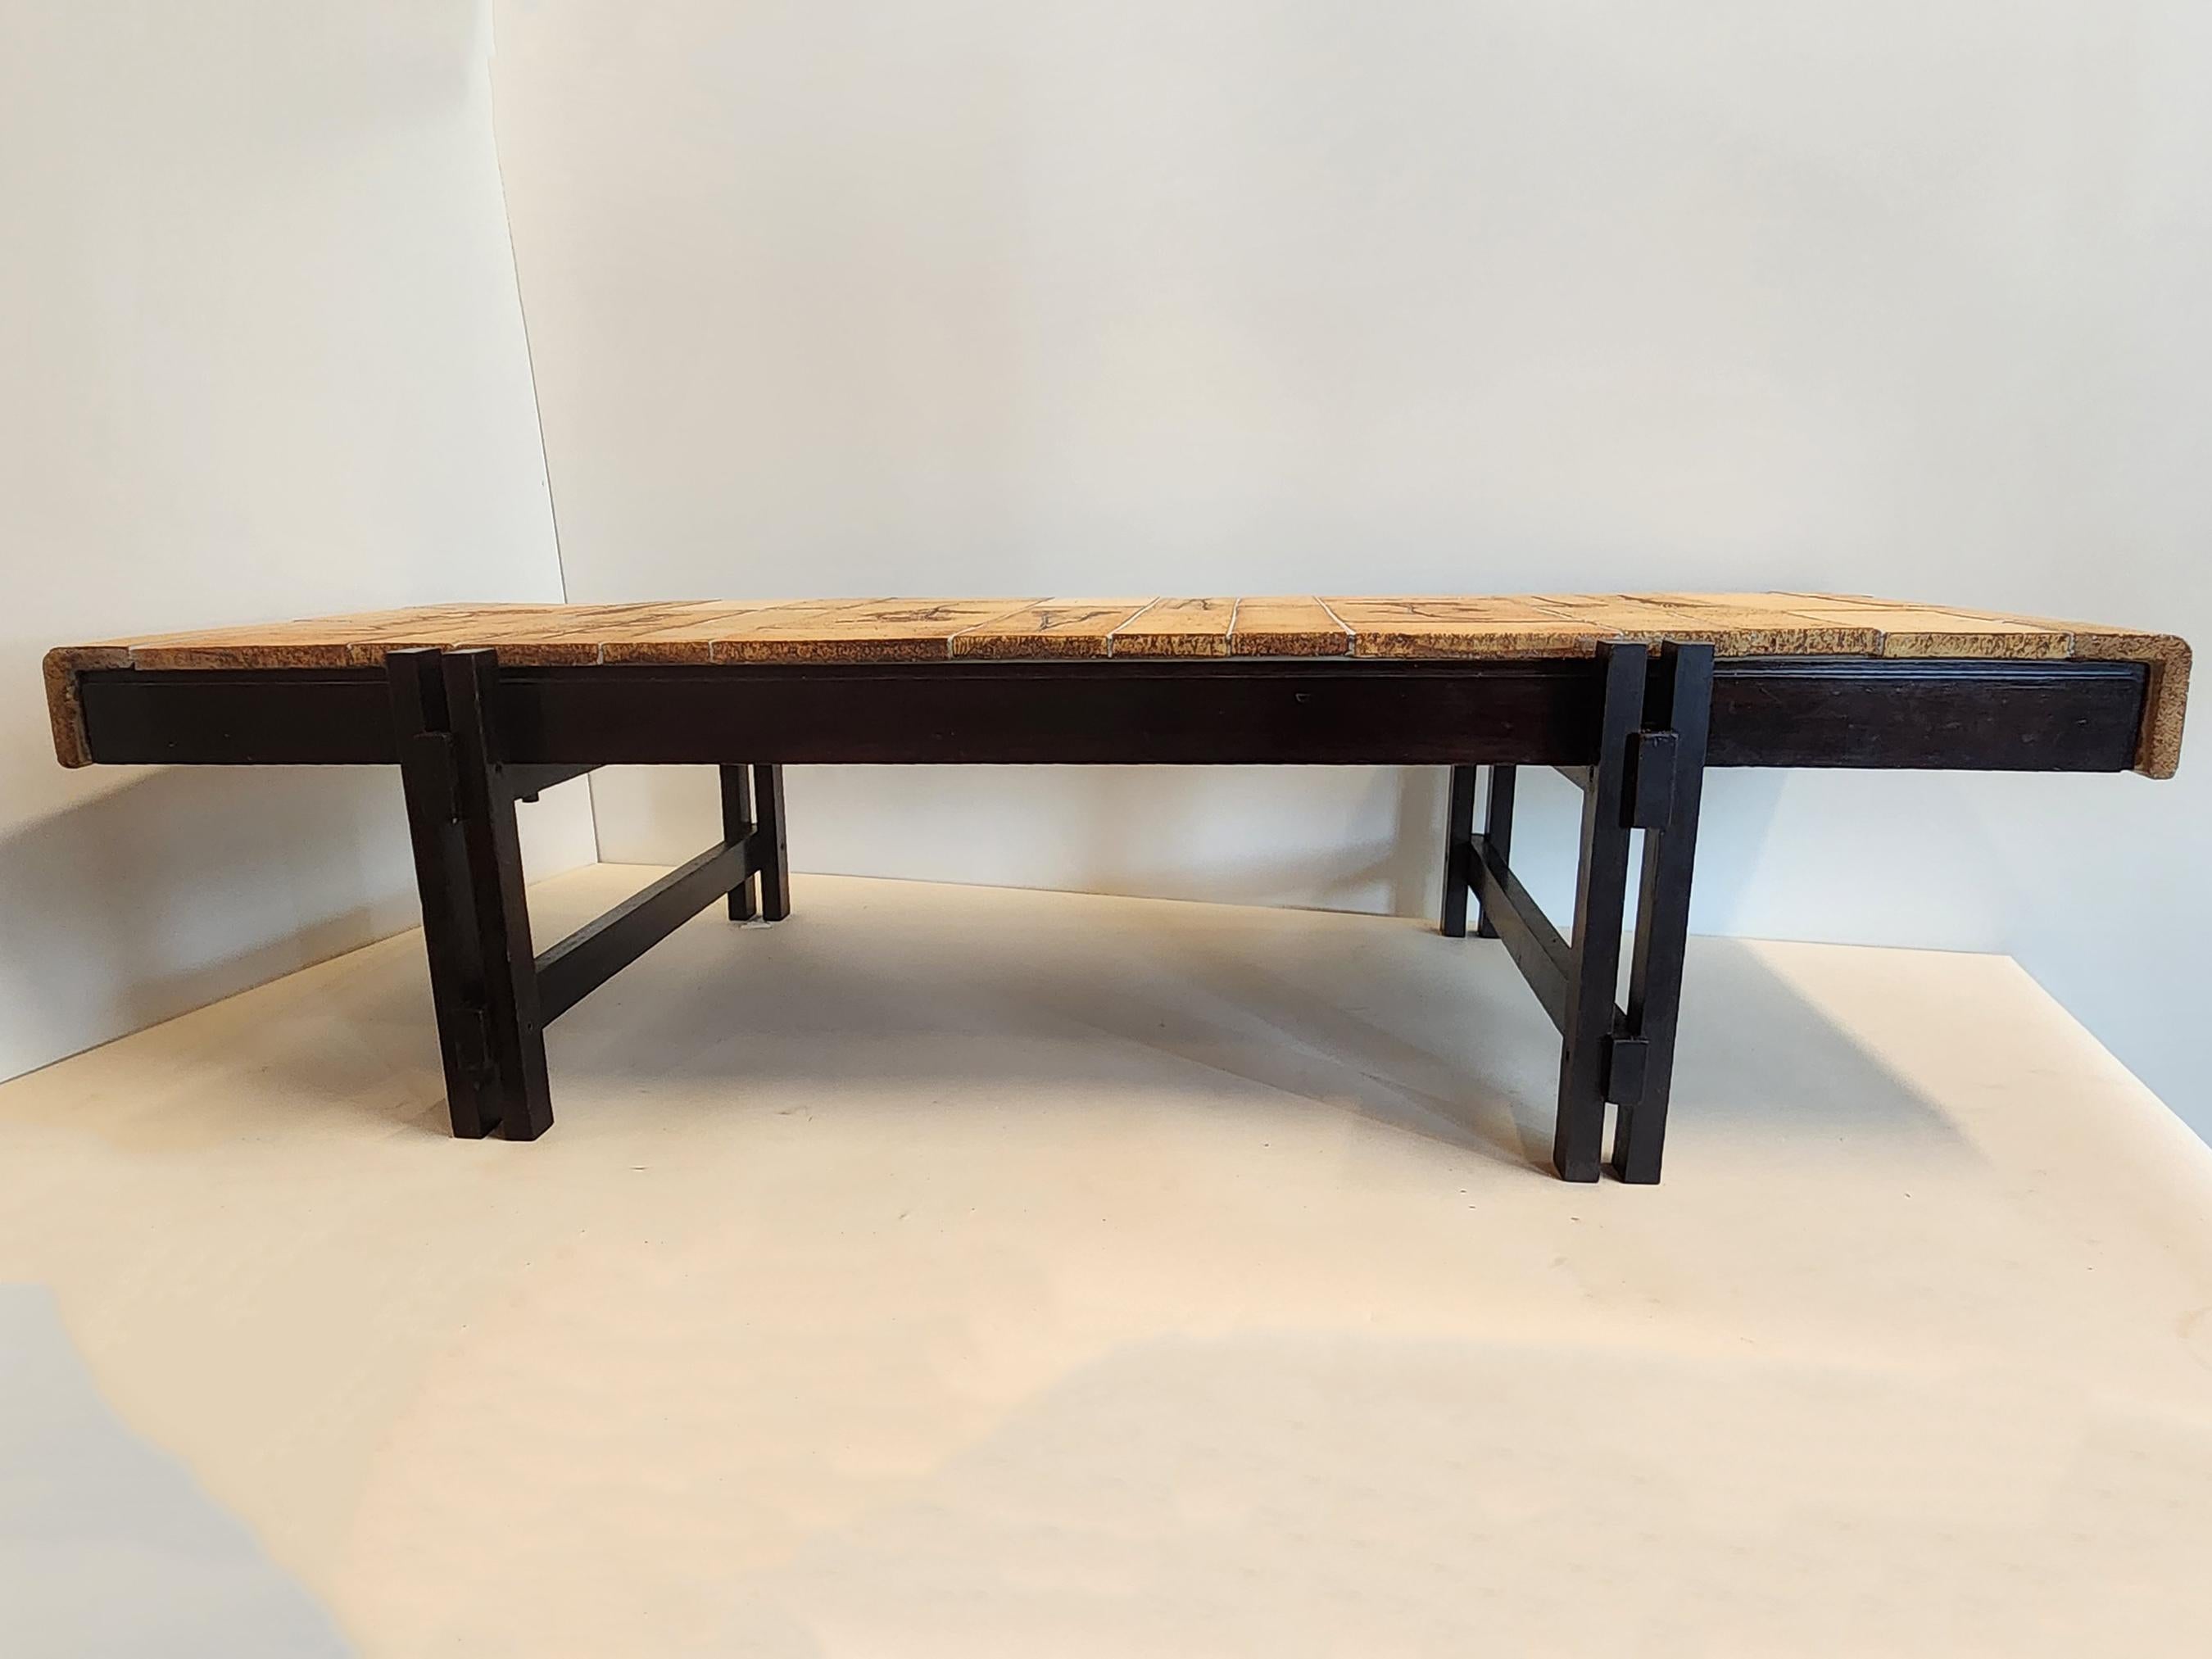 Ceramic Roger Capron - Large Coffee Table with Garrigue Tiles on Wood Frame, 1970s For Sale